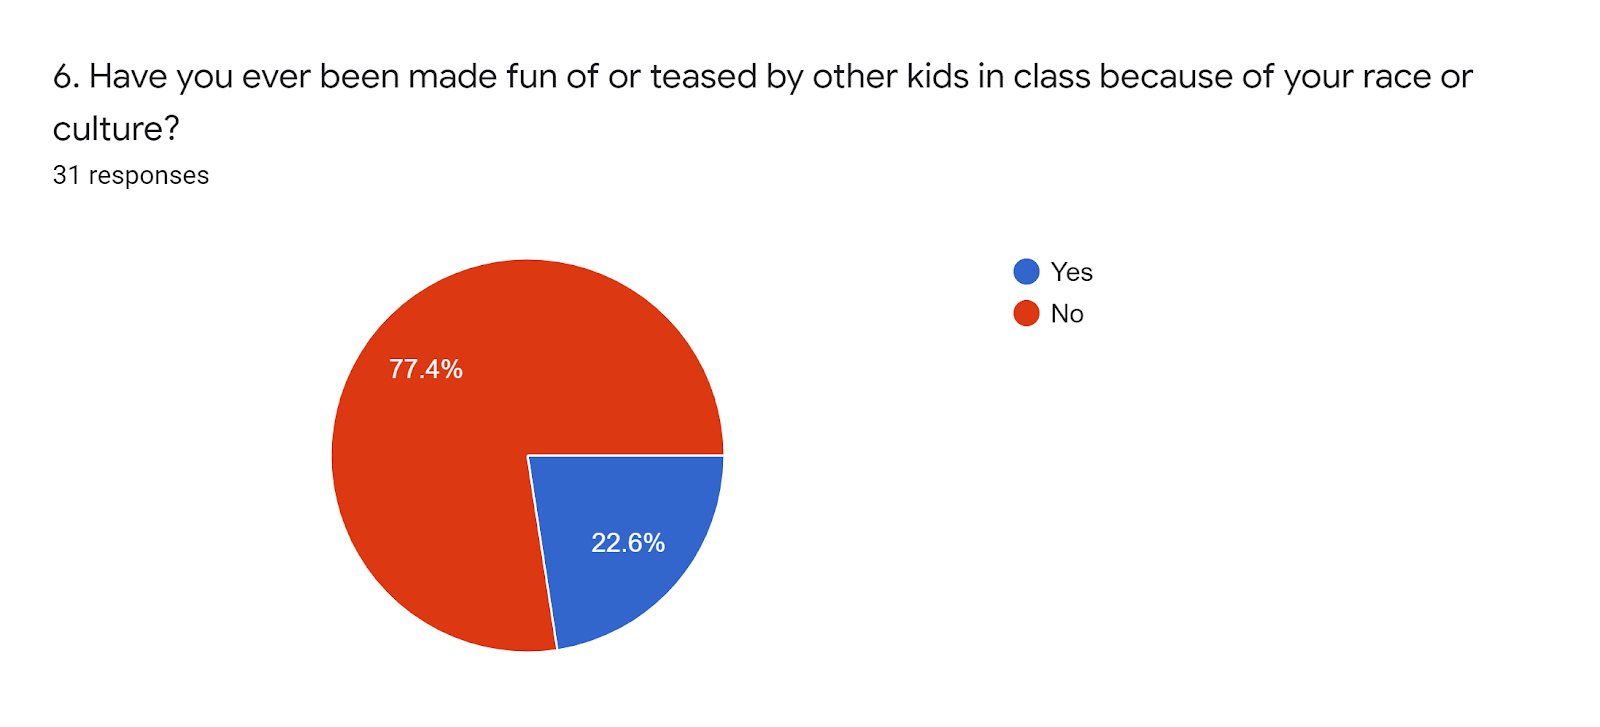 Forms response chart. Question title: 6. Have you ever been made fun of or teased by other kids in class because of your race or culture?. Number of responses: 31 responses.